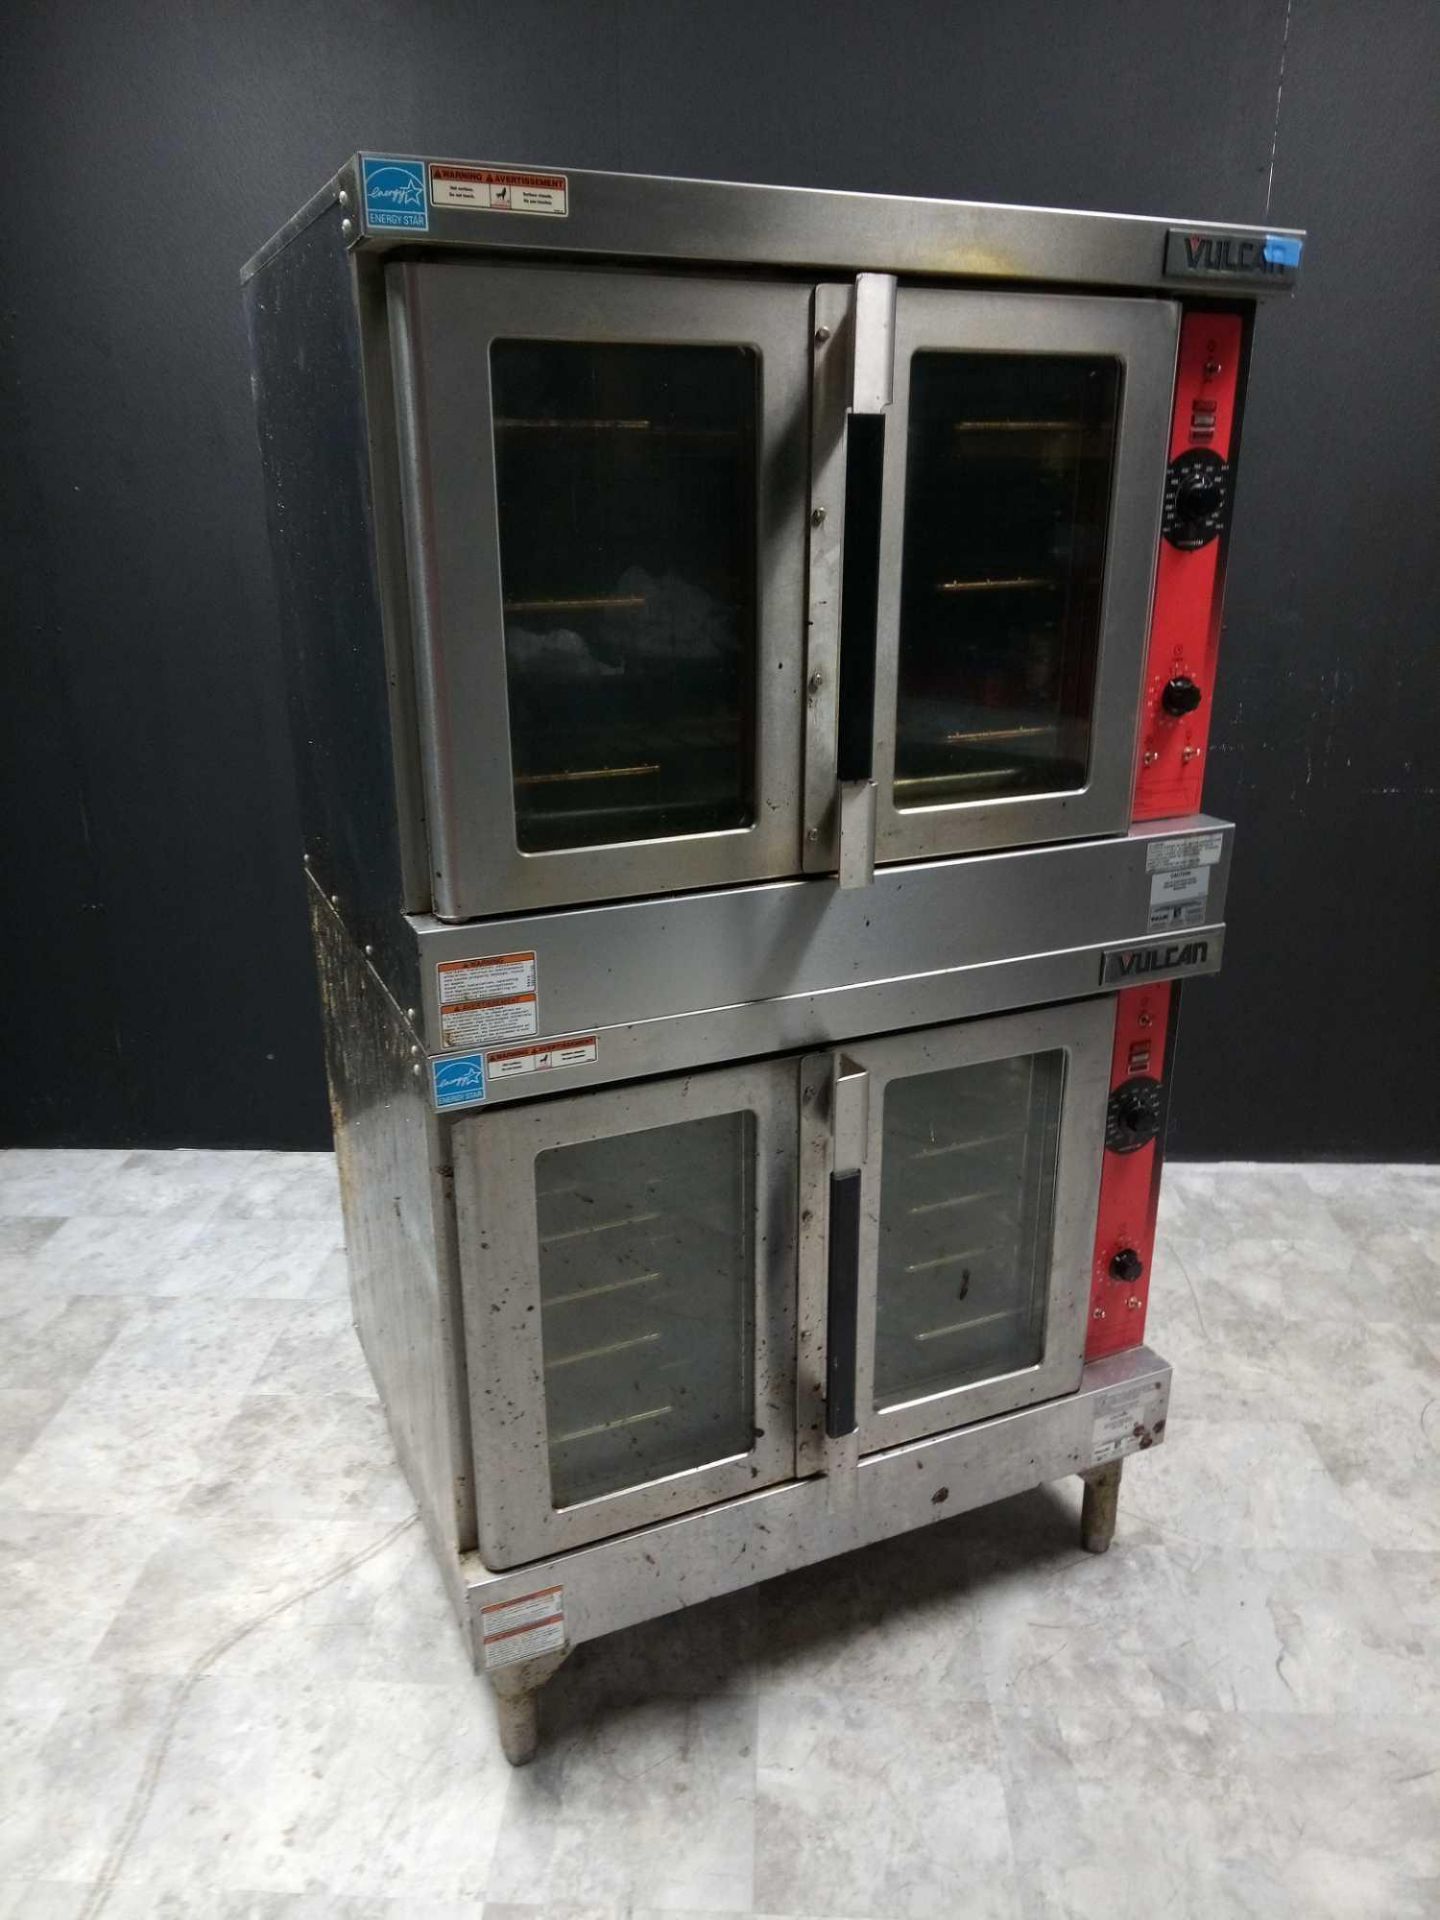 HOBART VULCAN VC4GD-11D350K COMMERCIAL DOUBLE OVEN